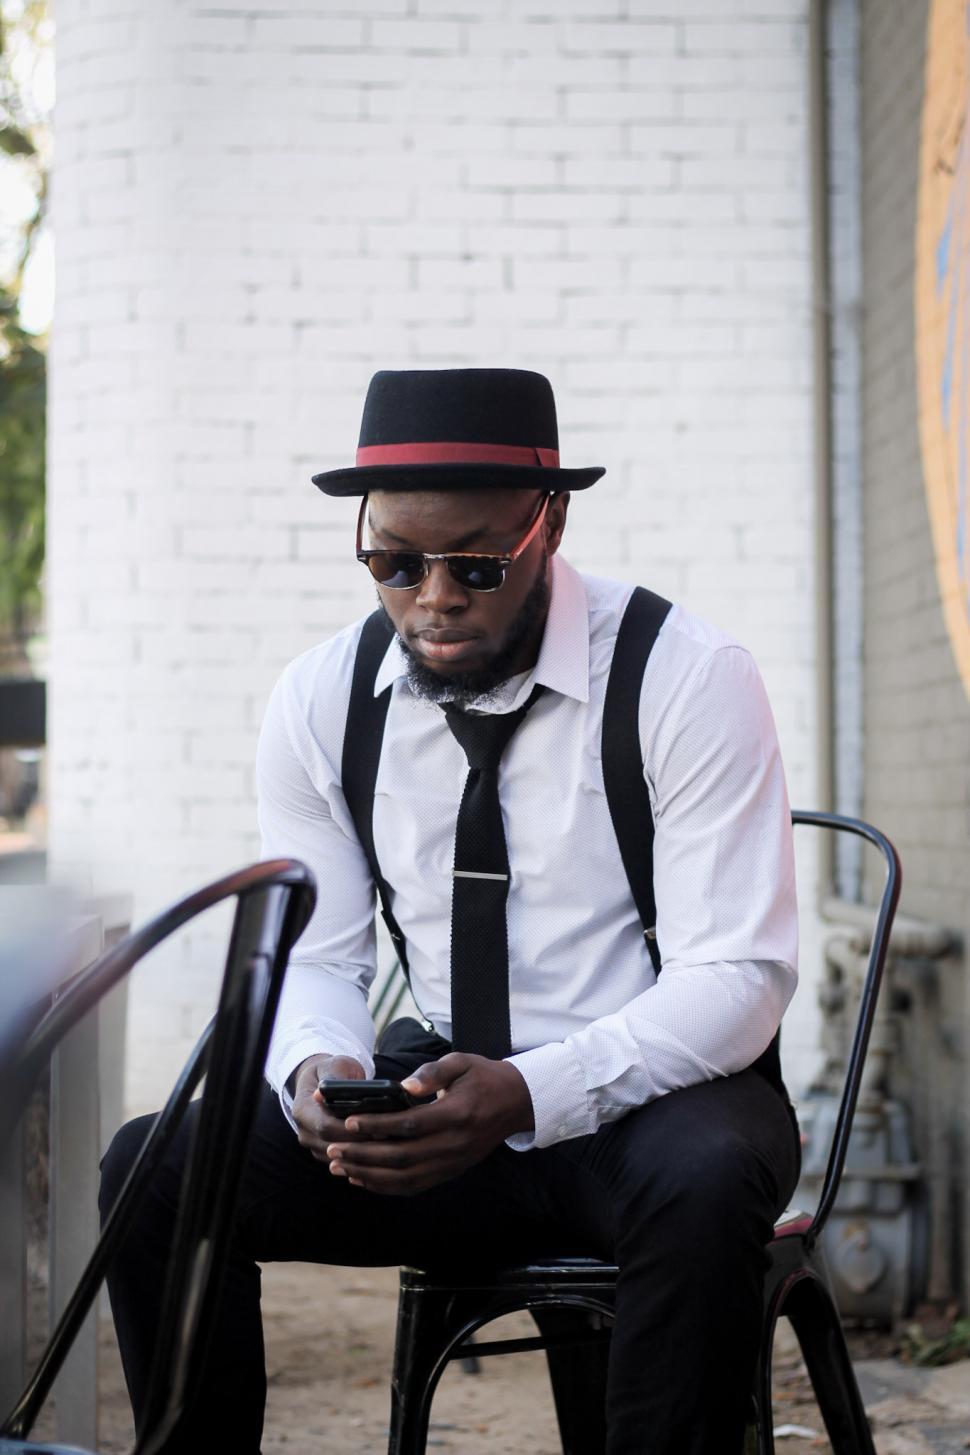 Free Image of Young Man in hat and suspenders using mobile phone 